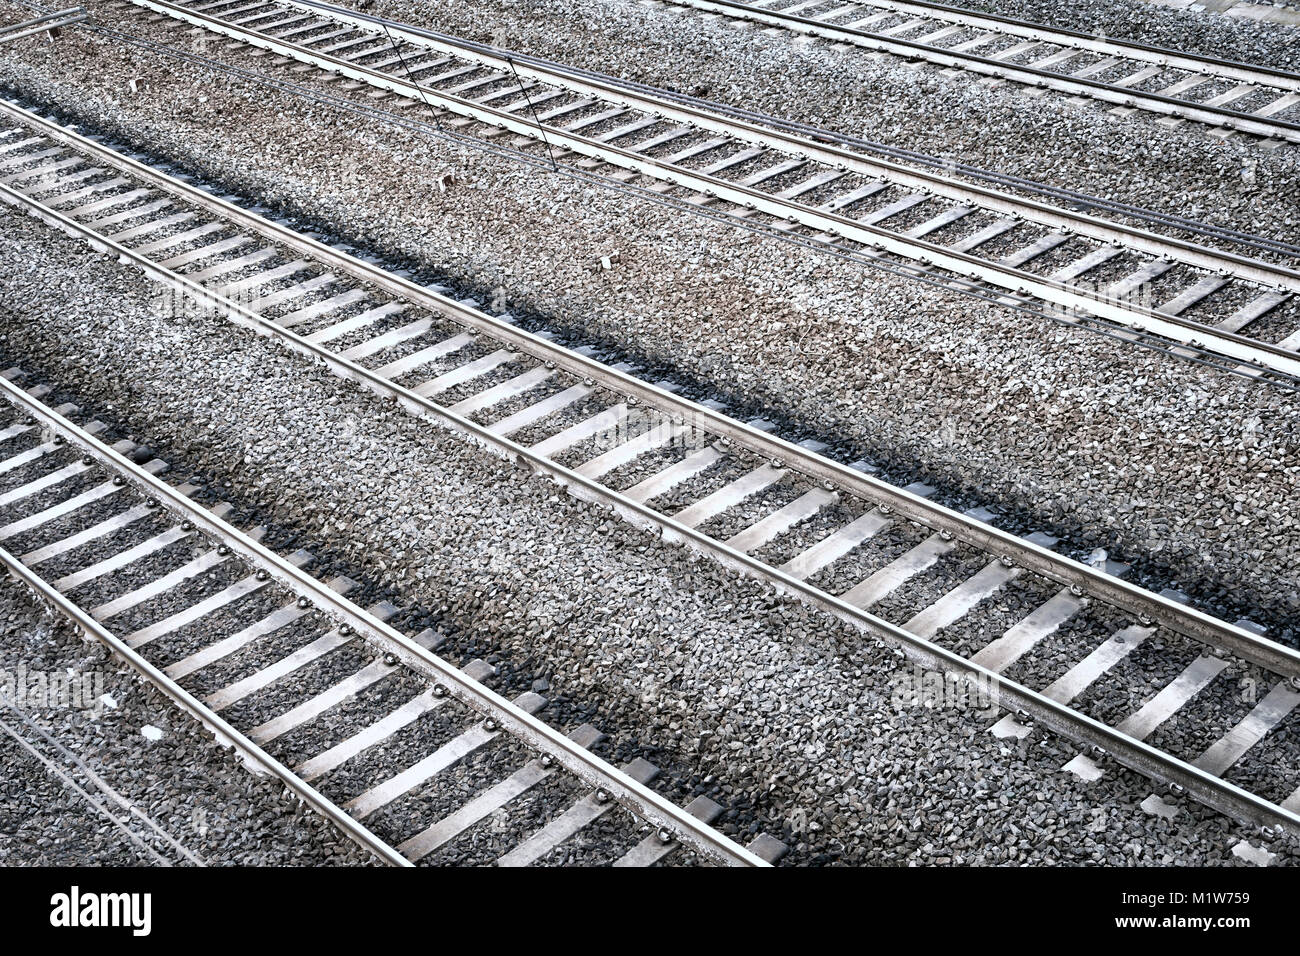 Four straight railroad tracks. Aerial perspective view. Stock Photo